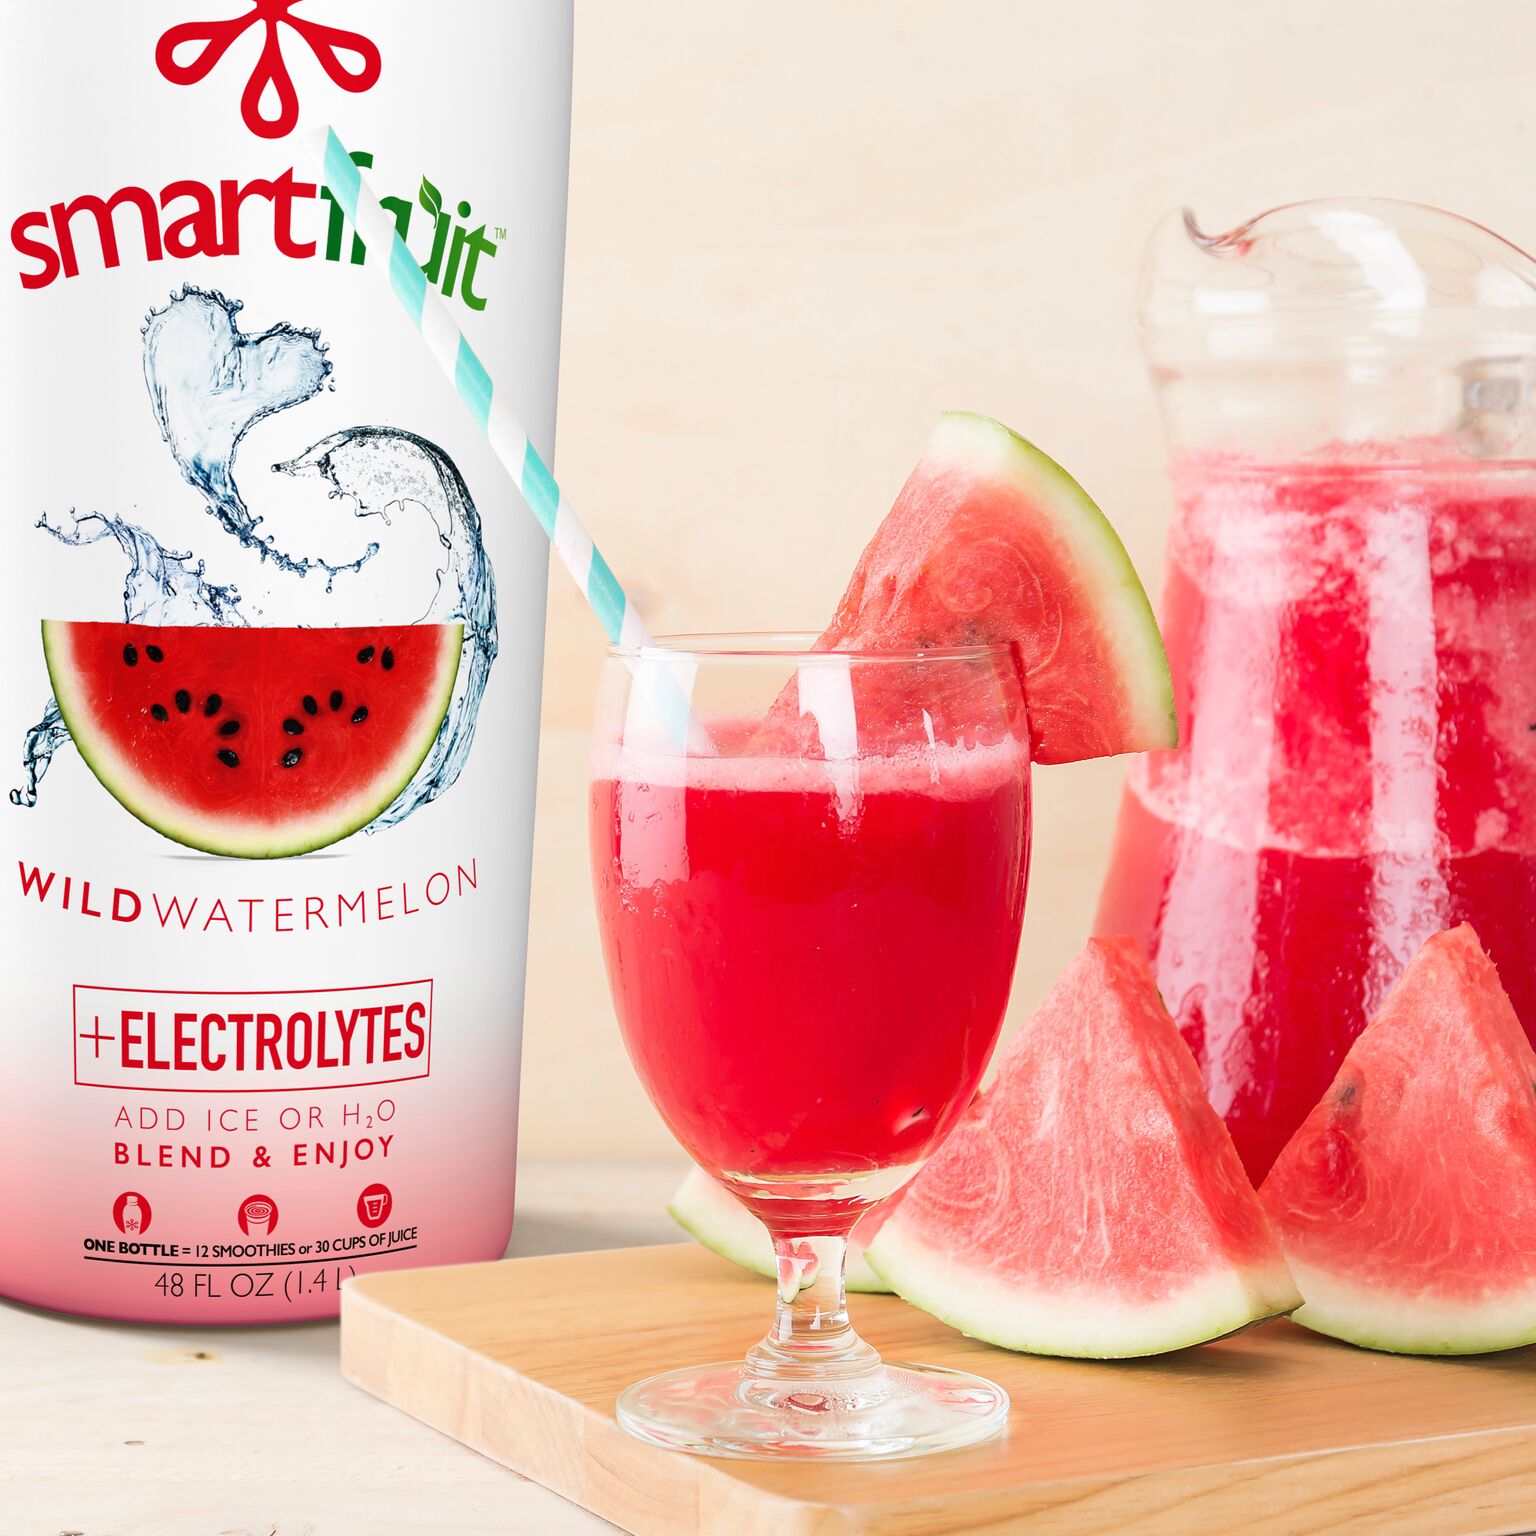 Coconut and Wild Watermelon Infused Juice Made with Smartfruit